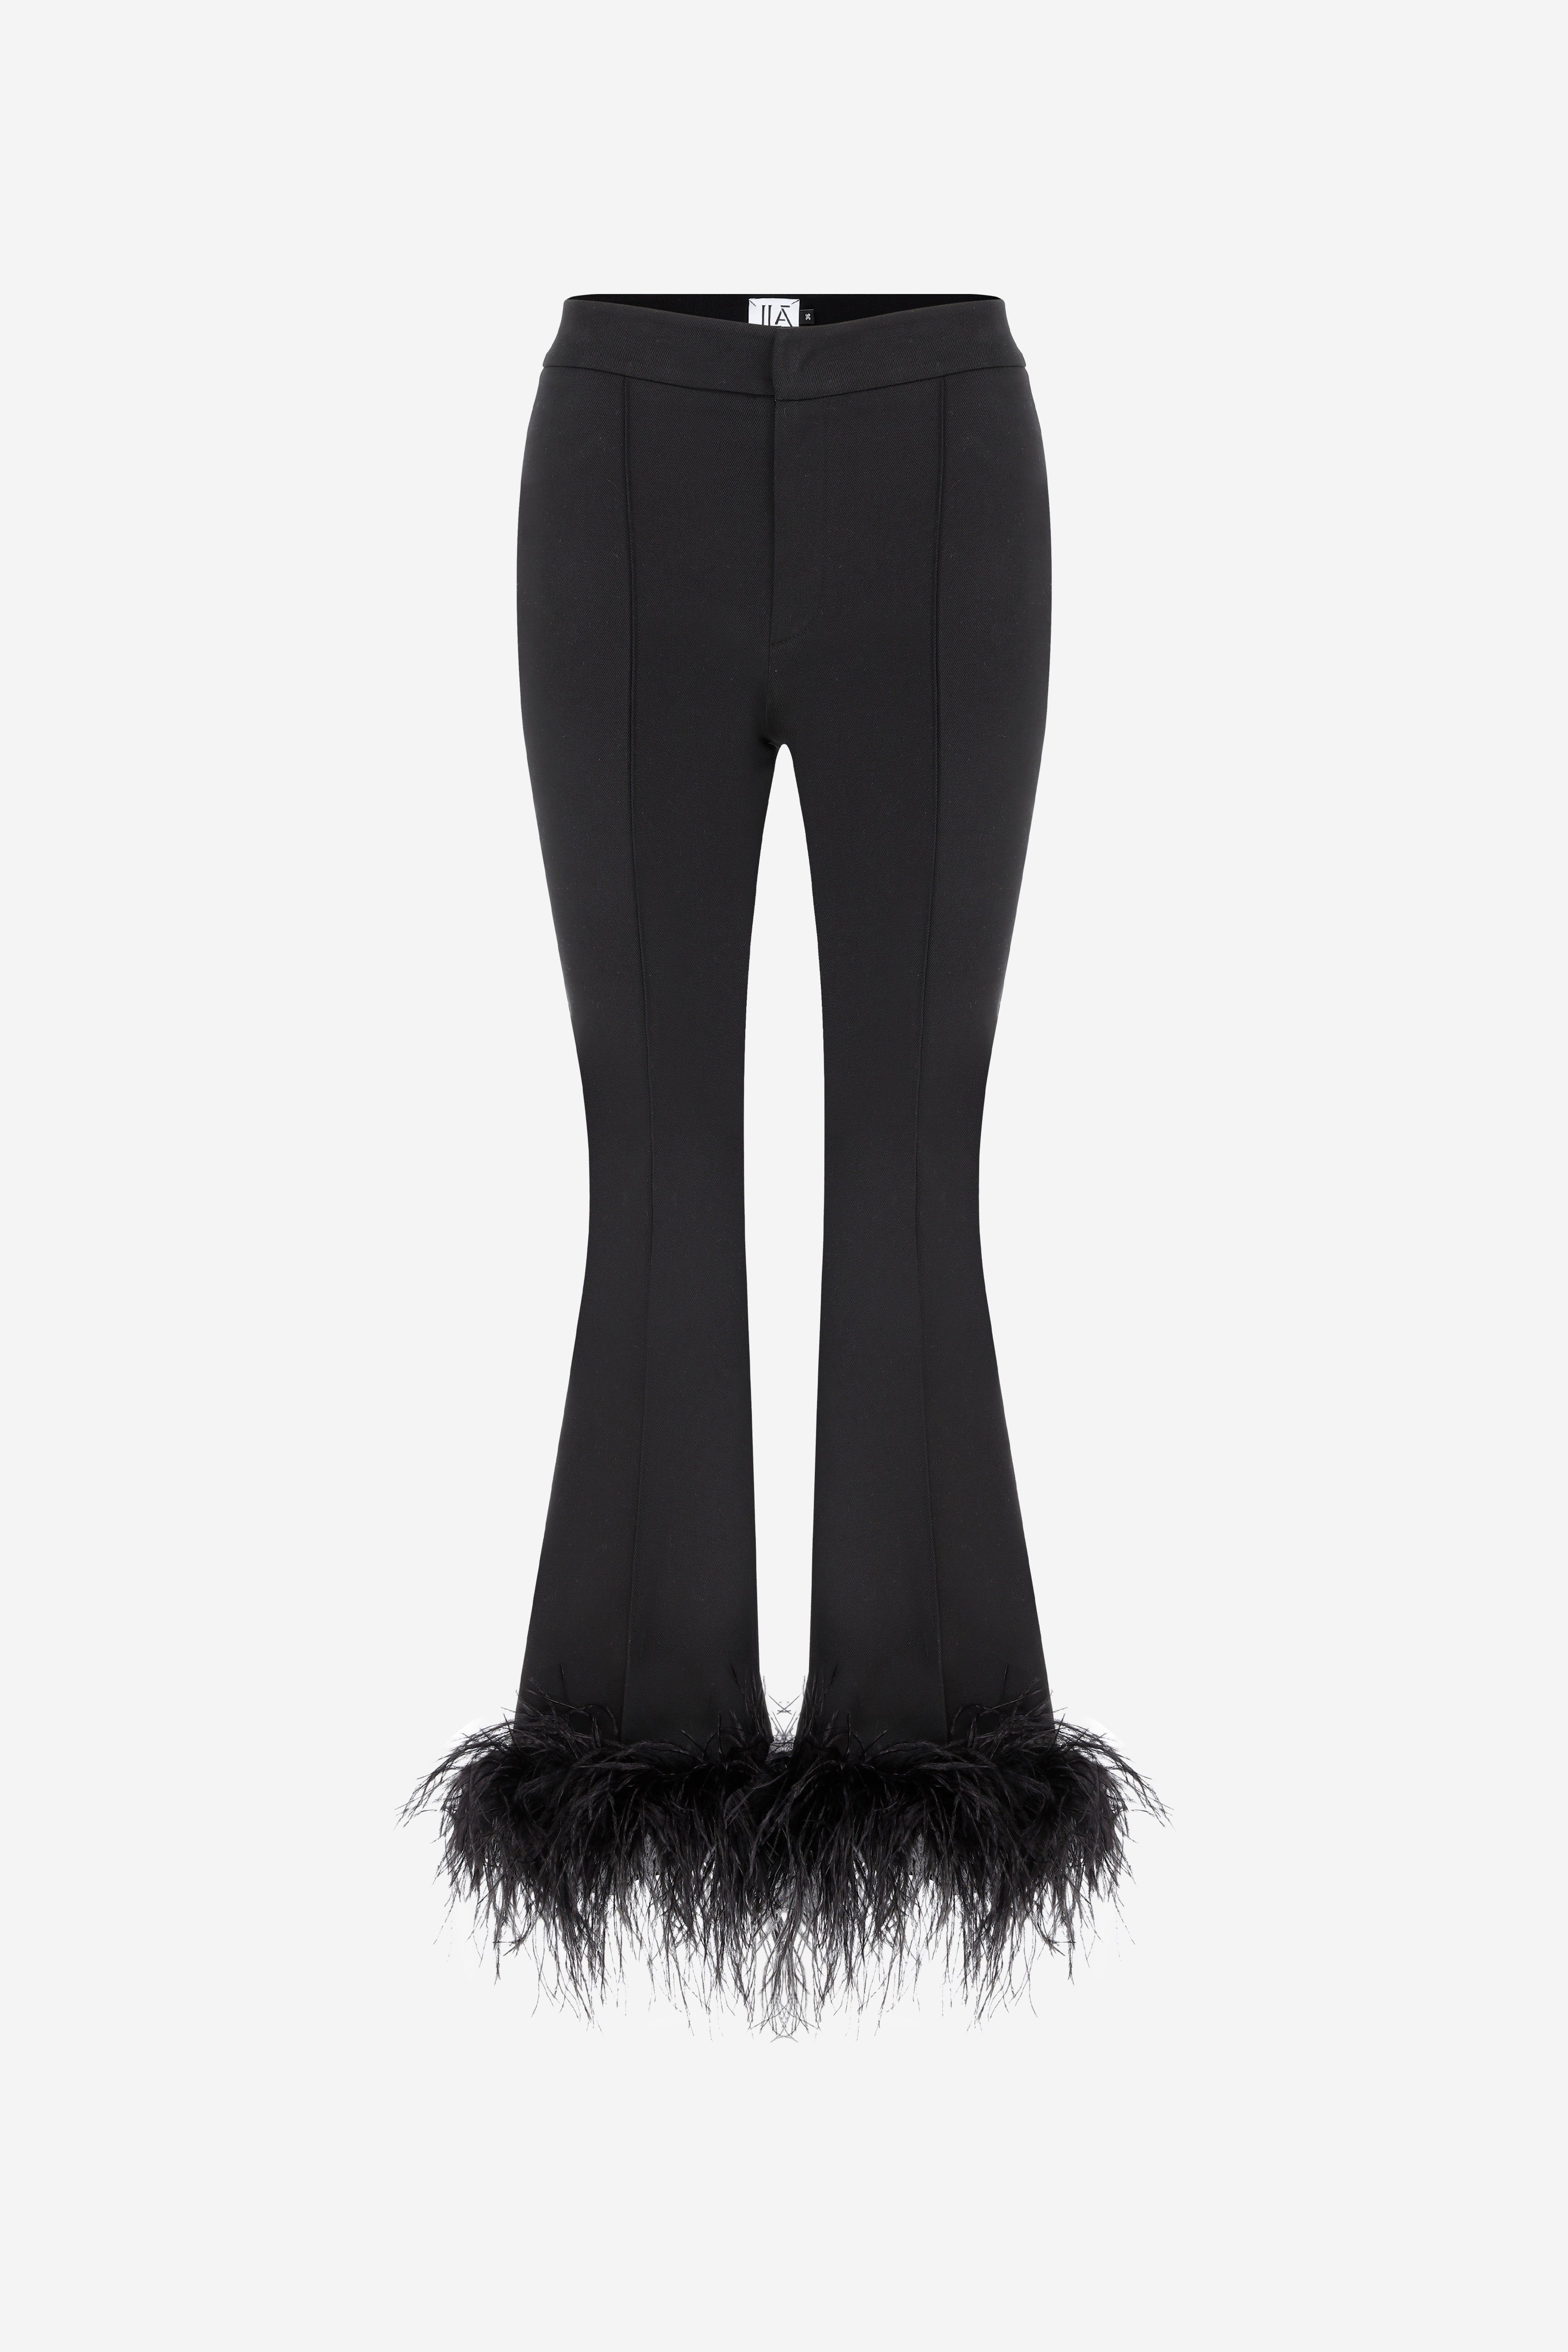 NEO - TROUSERS WITH OSTRICH FEATHERS in Black